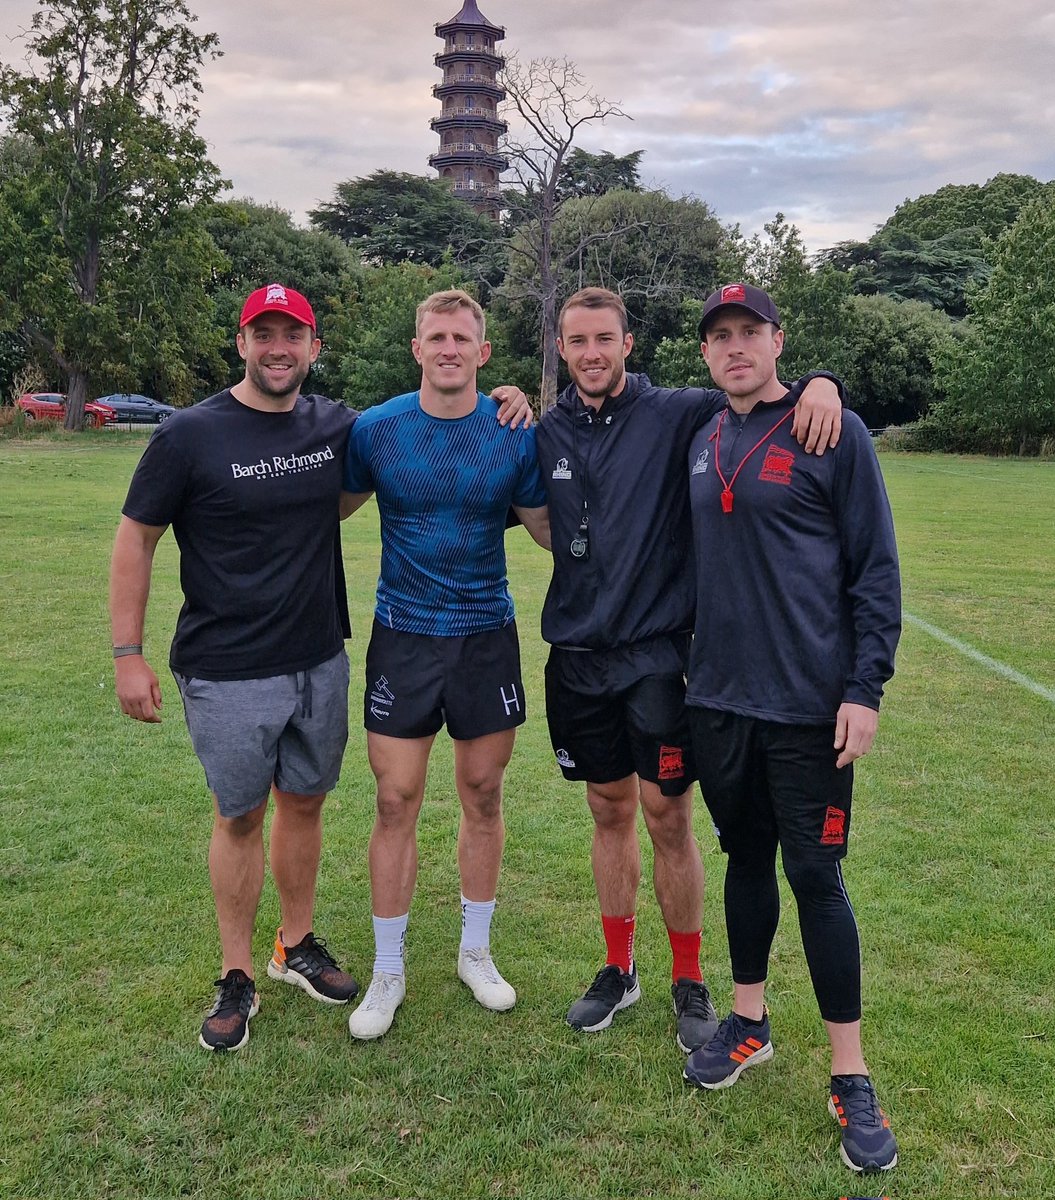 Class to be catching up with old Pals @Will_Tayls91 @CaiGriffiths @SShingler2667 and training with @LondonWelshRFC this evening 🙌🔥 Thanks for having me join in lads 👊 always a pleasure catching up with you #therugbytrainer